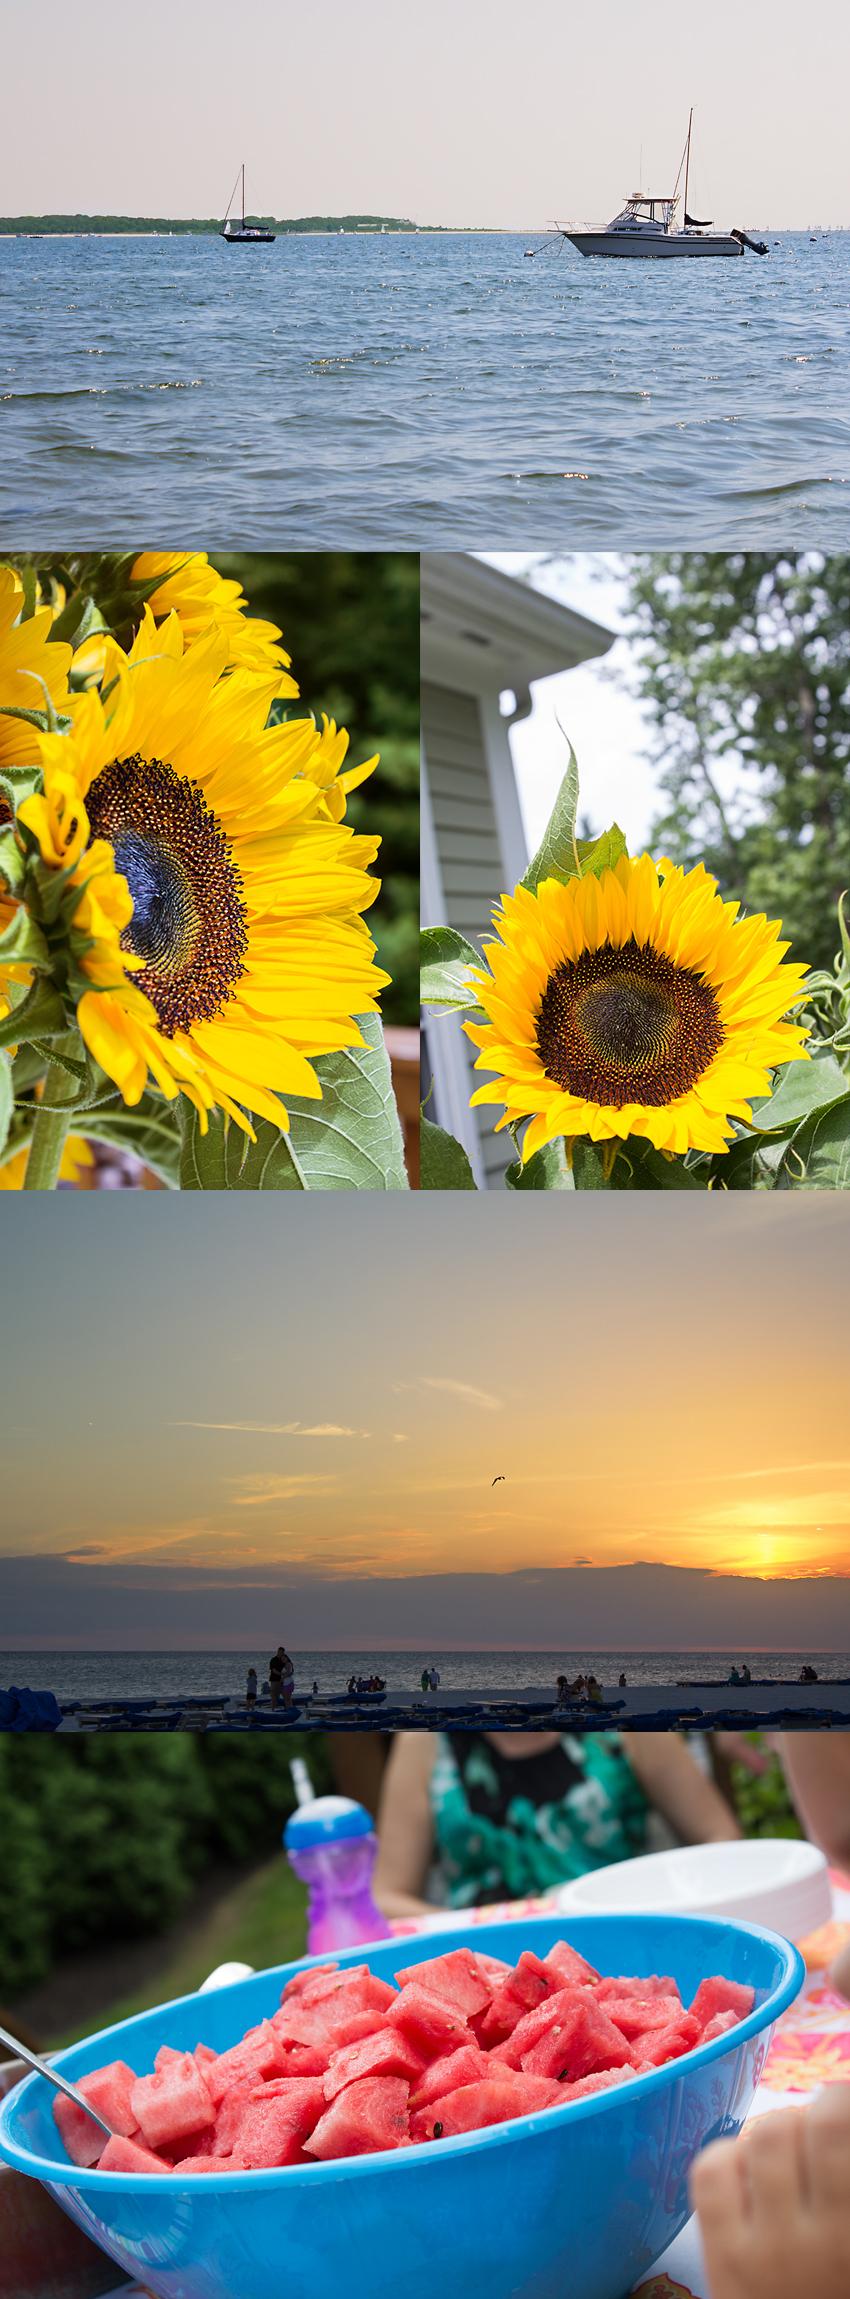 Summer sunflower cape cod waves boat fruit salad watermelon sunset collage storyboard